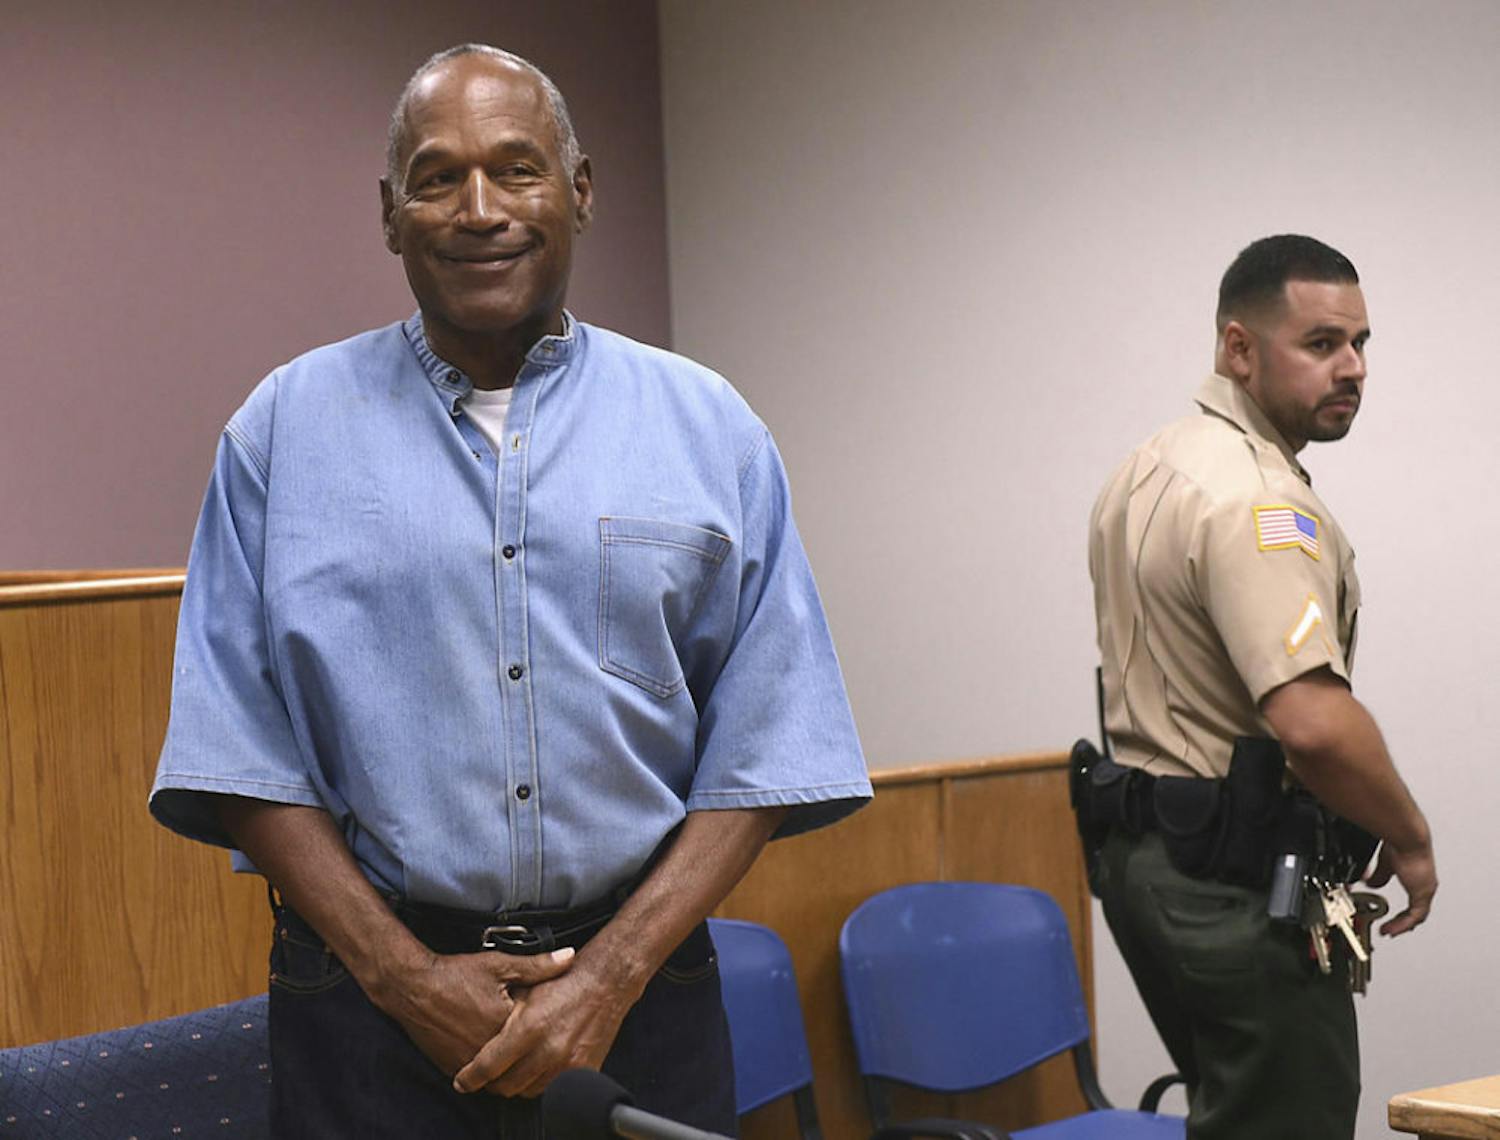 O.J. Simpson smiles during his parole hearing in Nevada&nbsp;on Thursday. Simpson was granted parole and is set to be released from jail on&nbsp;Oct. 1.